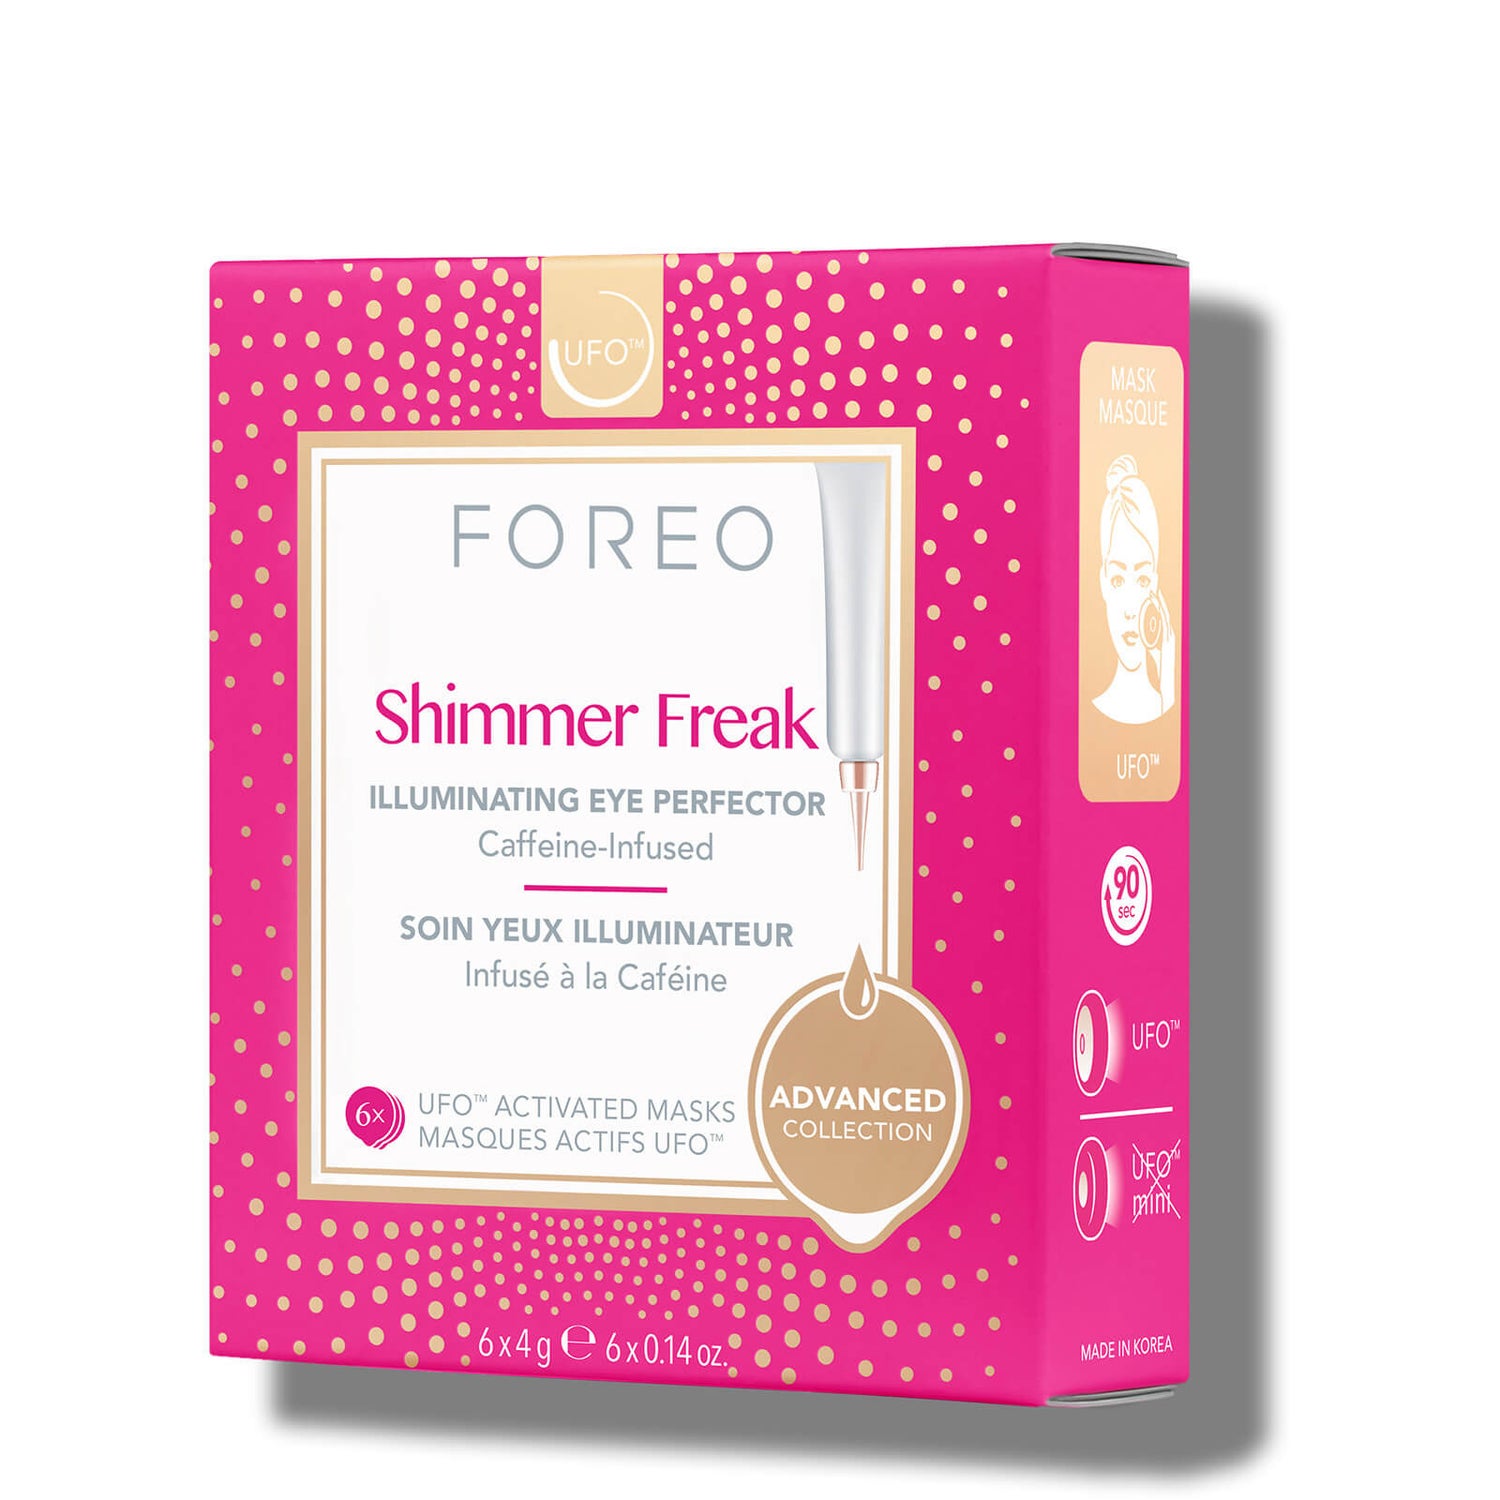 FOREO UFO Activated Masks - Shimmer Freak (6 count)